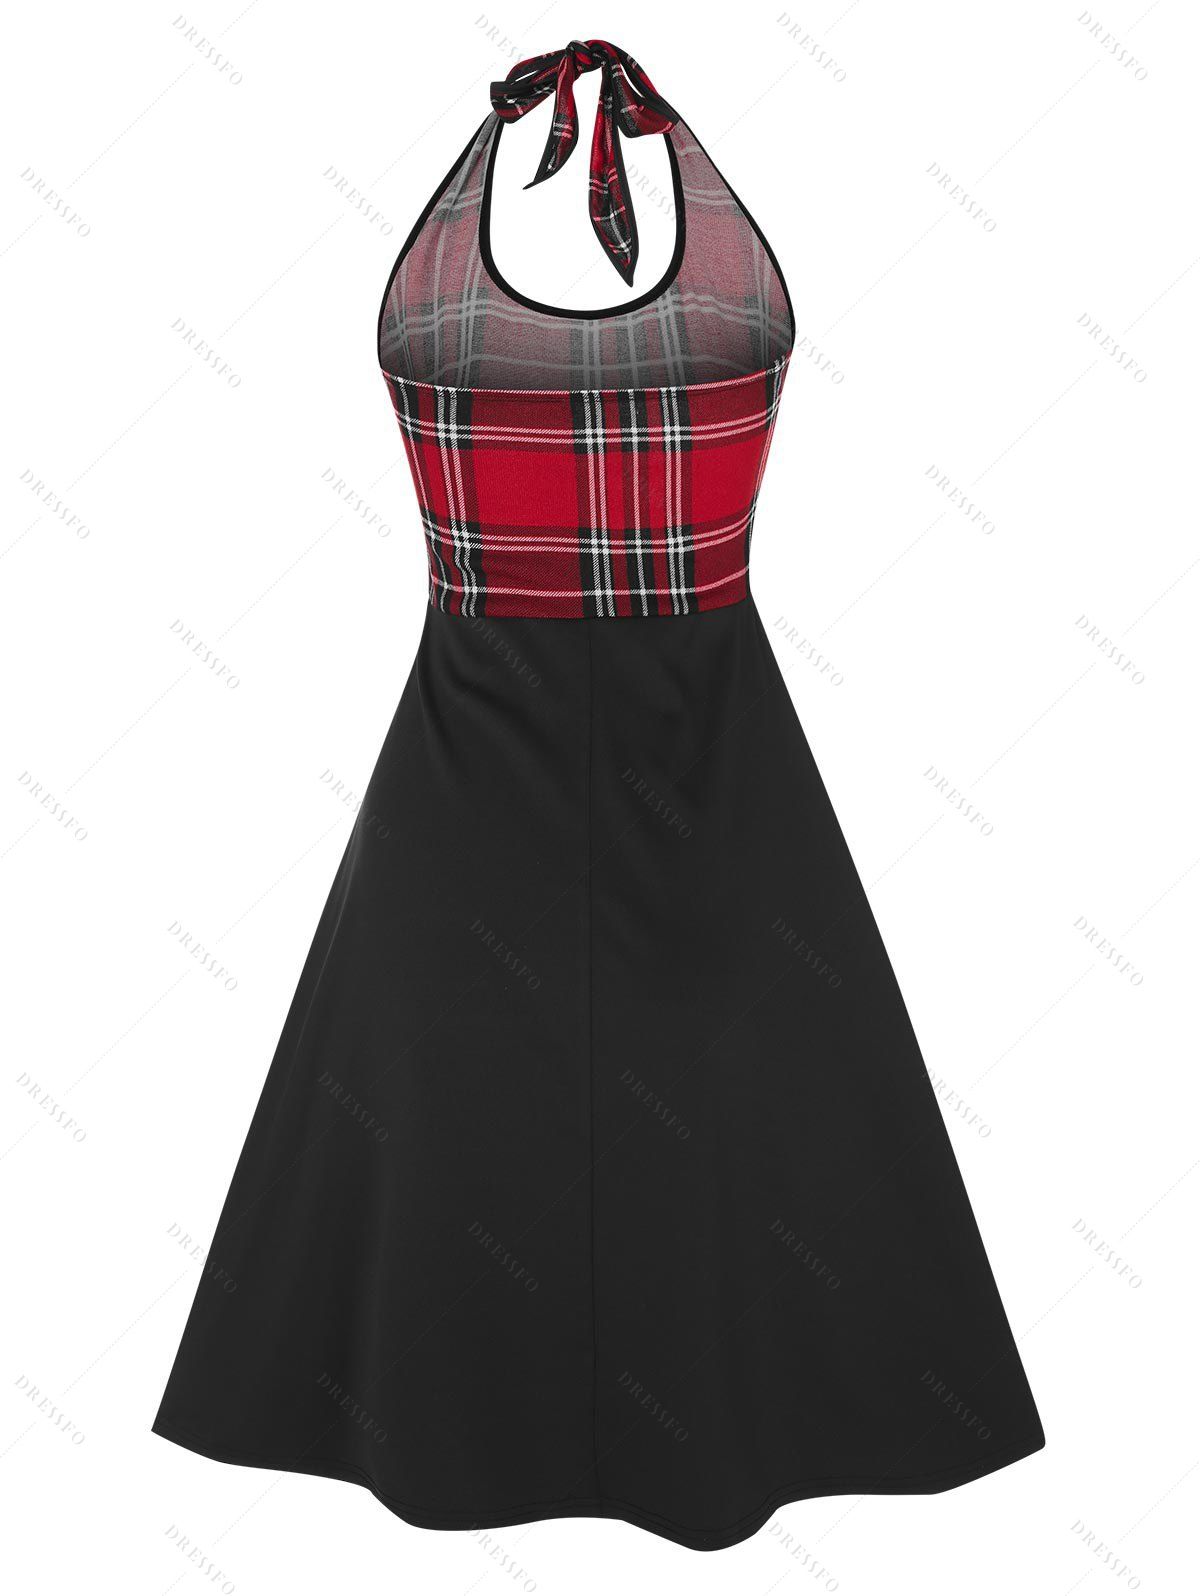 Plaid Print Pin Up Dress Grommet Lace Up Halter Bowknot Backless A Line Dress 